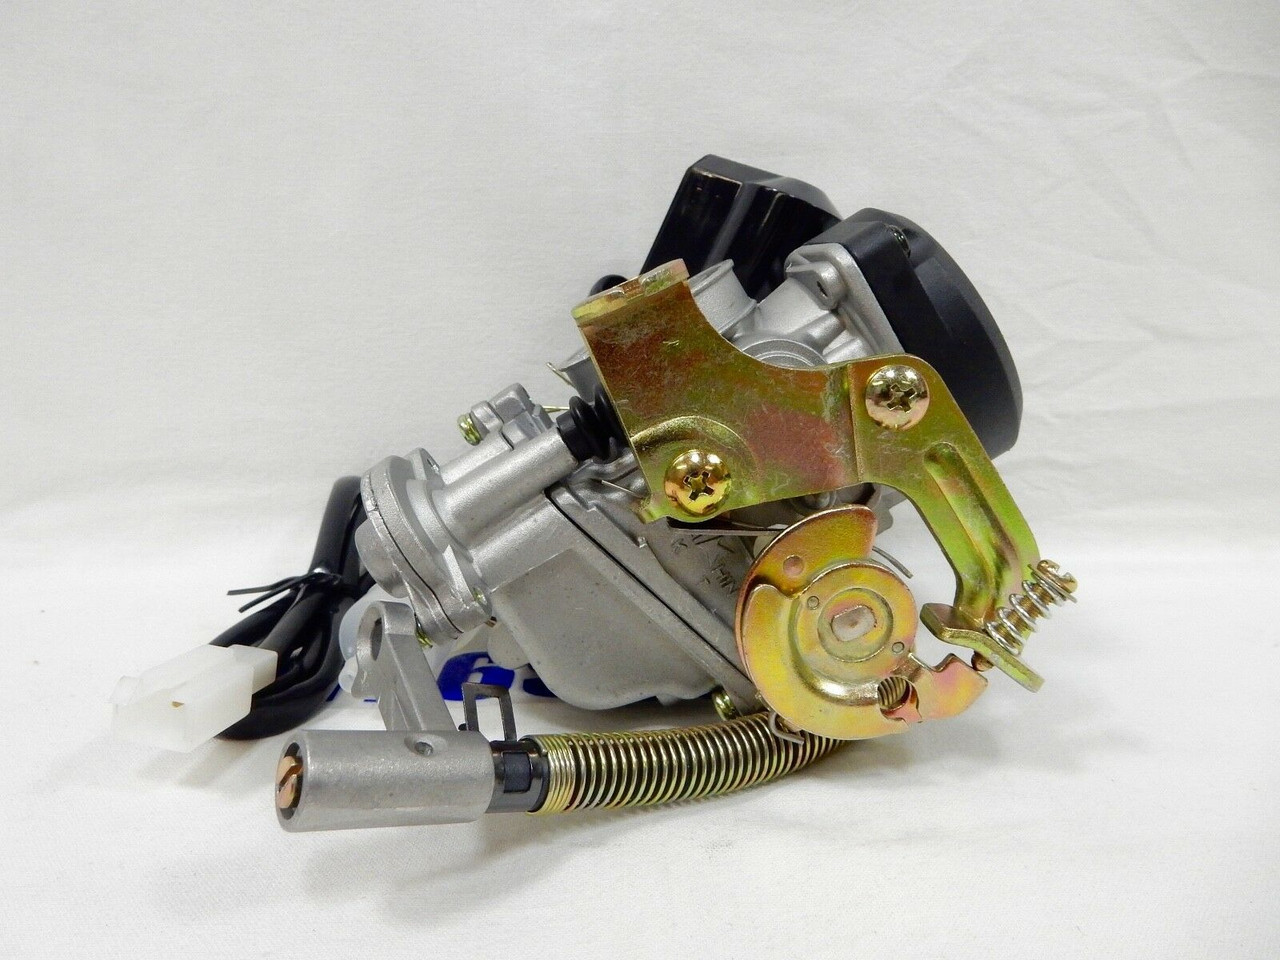 KEIHIN 19mm PERFORMANCE CARBURETOR FOR CHINESE SCOOTERS 50cc - 100cc QMB139